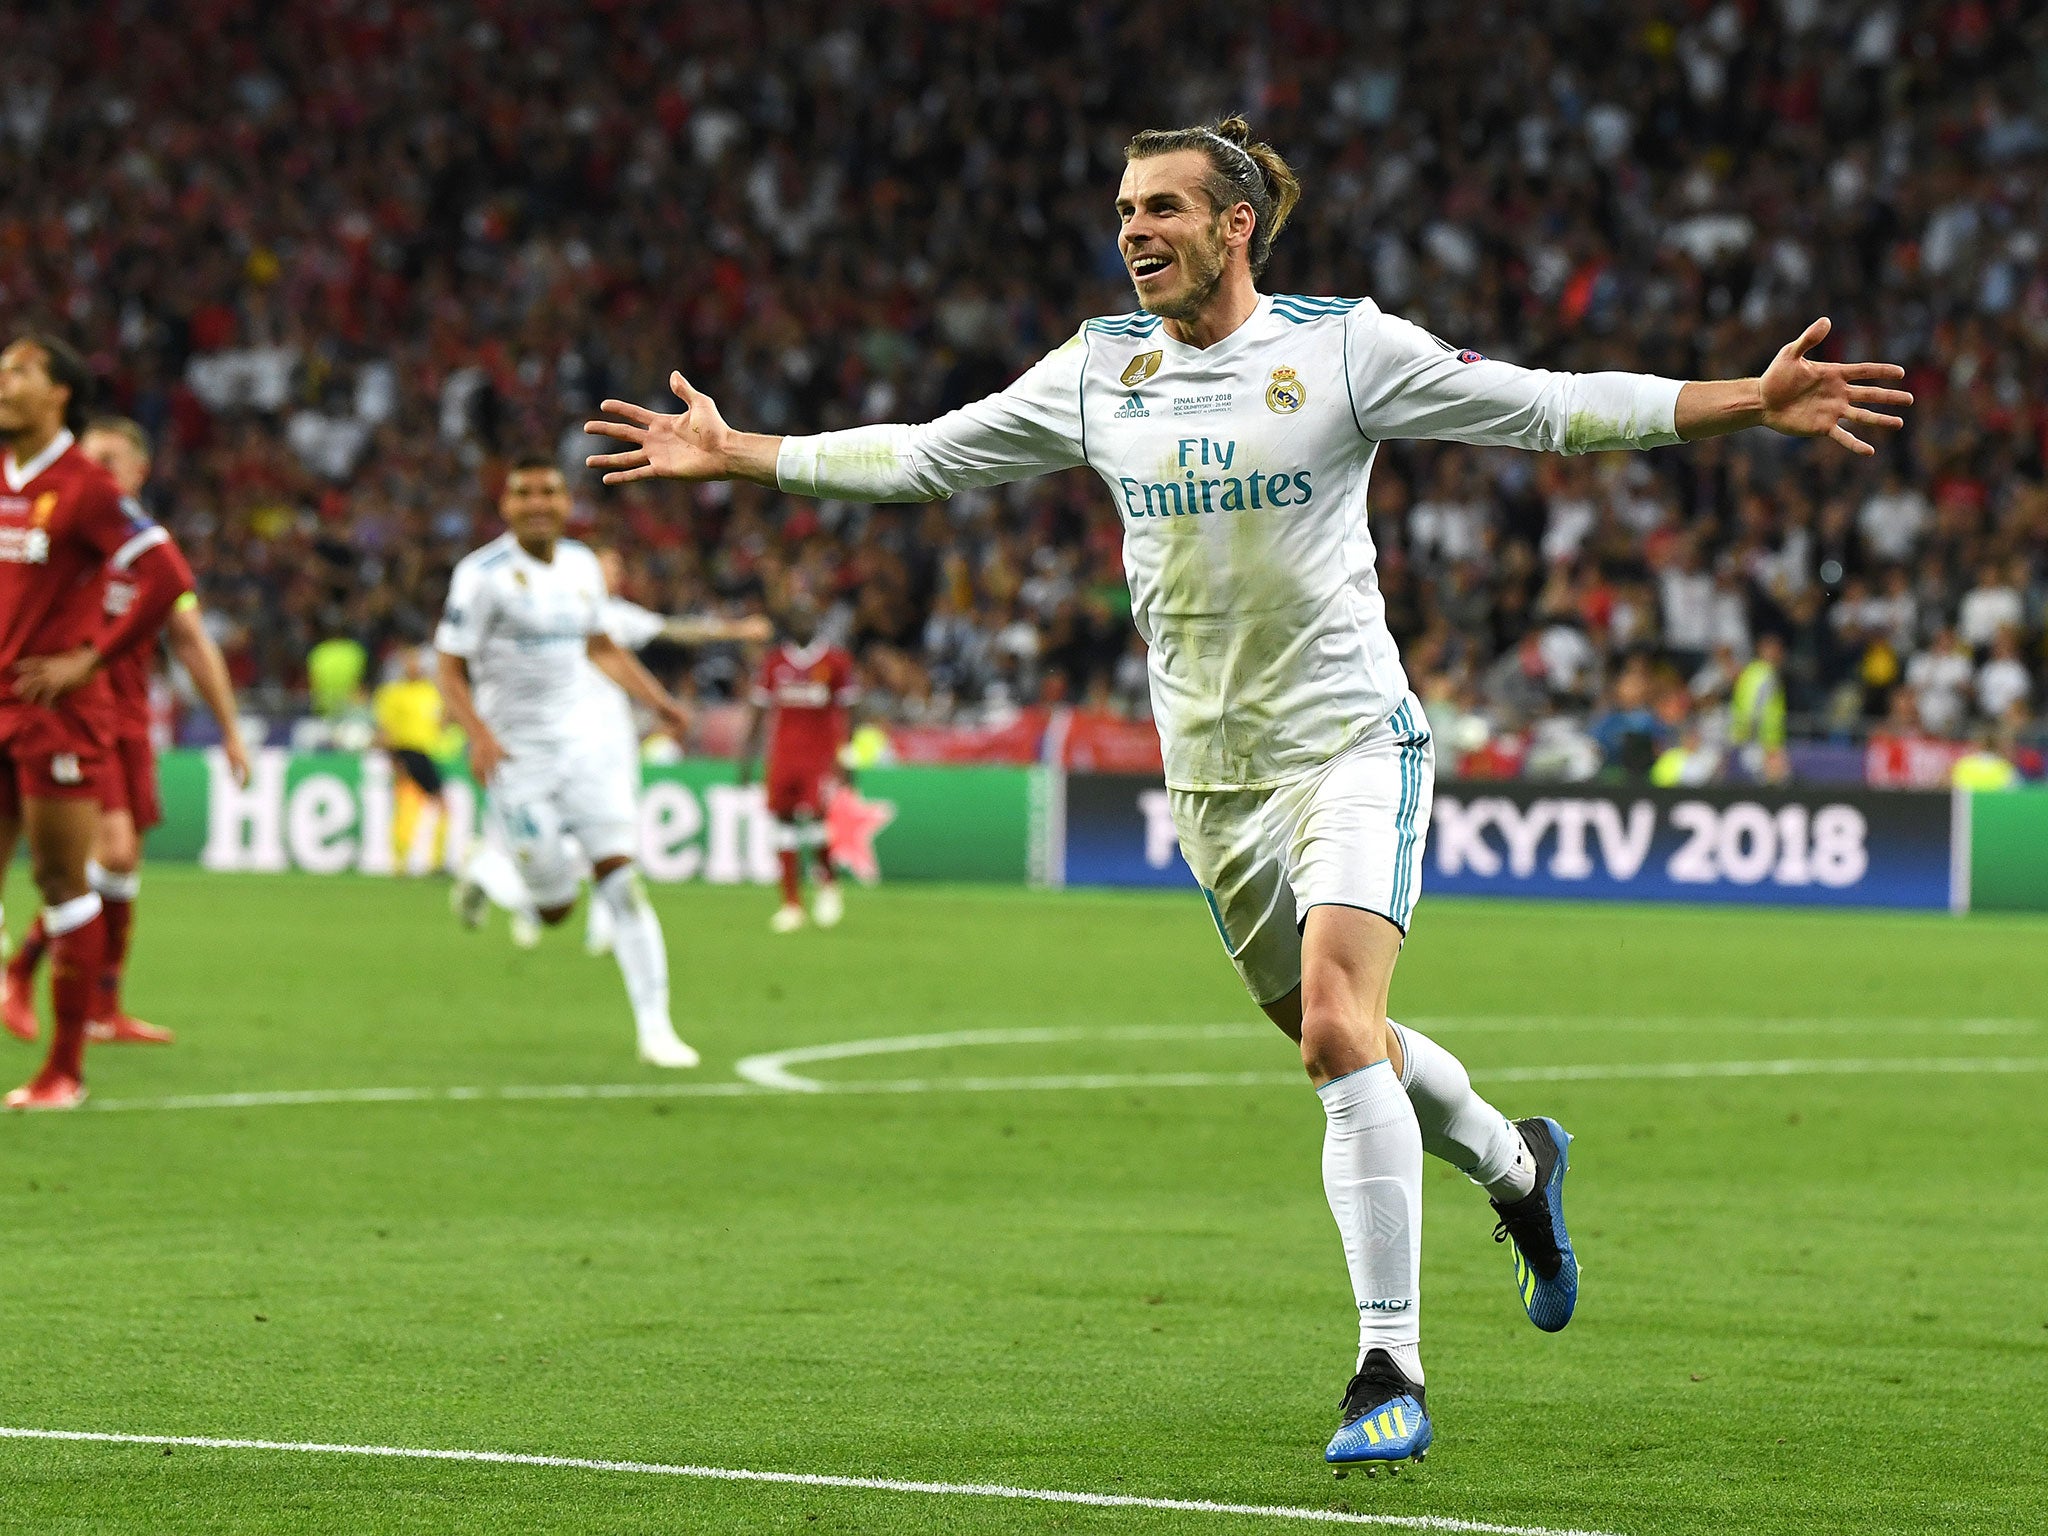 Bale is set to leave Real after his Champions League final heroics